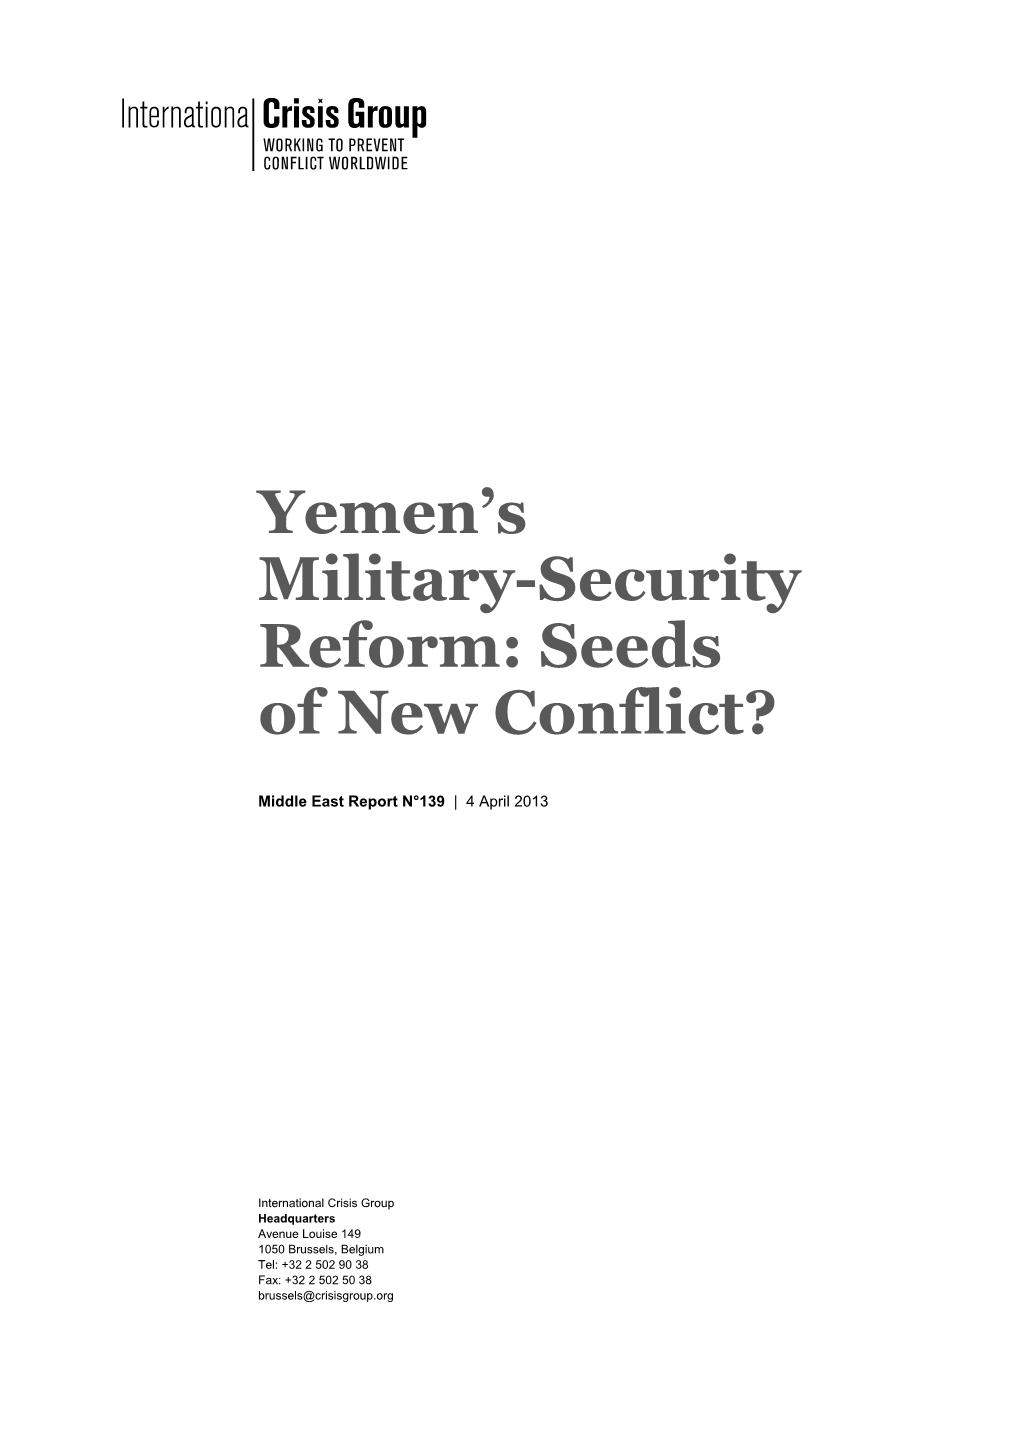 Yemen's Military-Security Reform: Seeds of New Conflict?